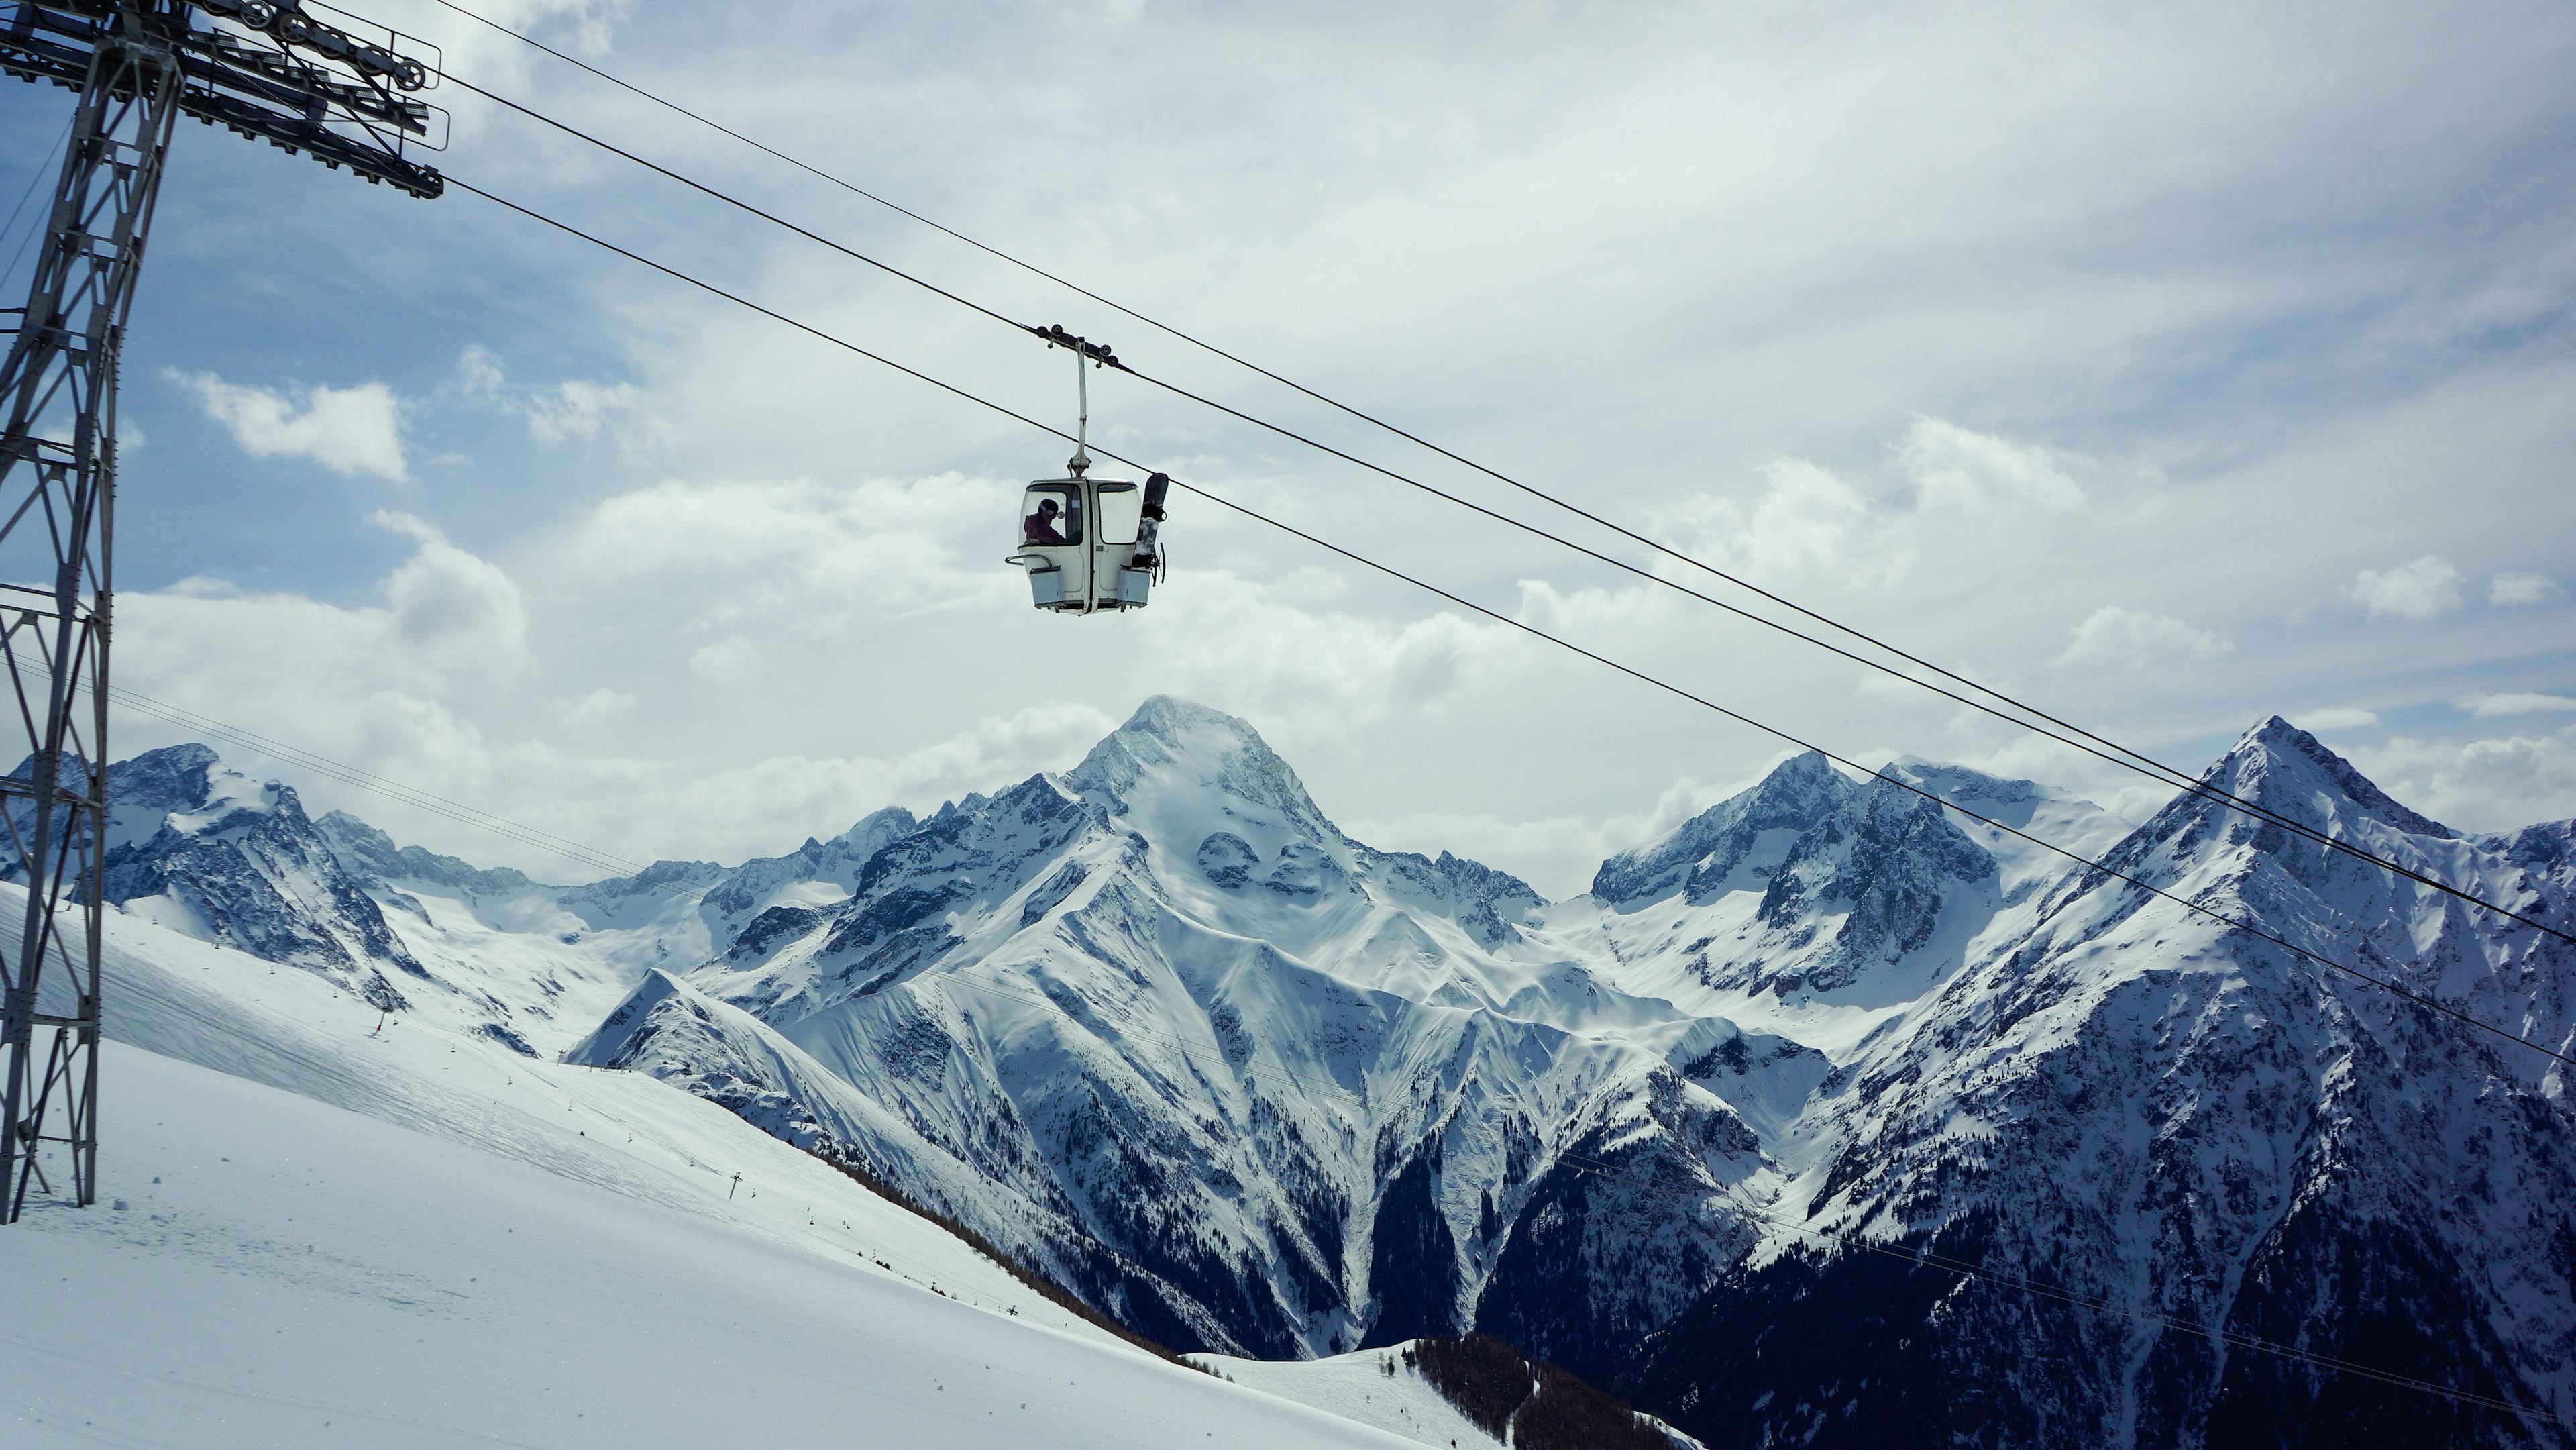 A cablecar going up a snowy mountain